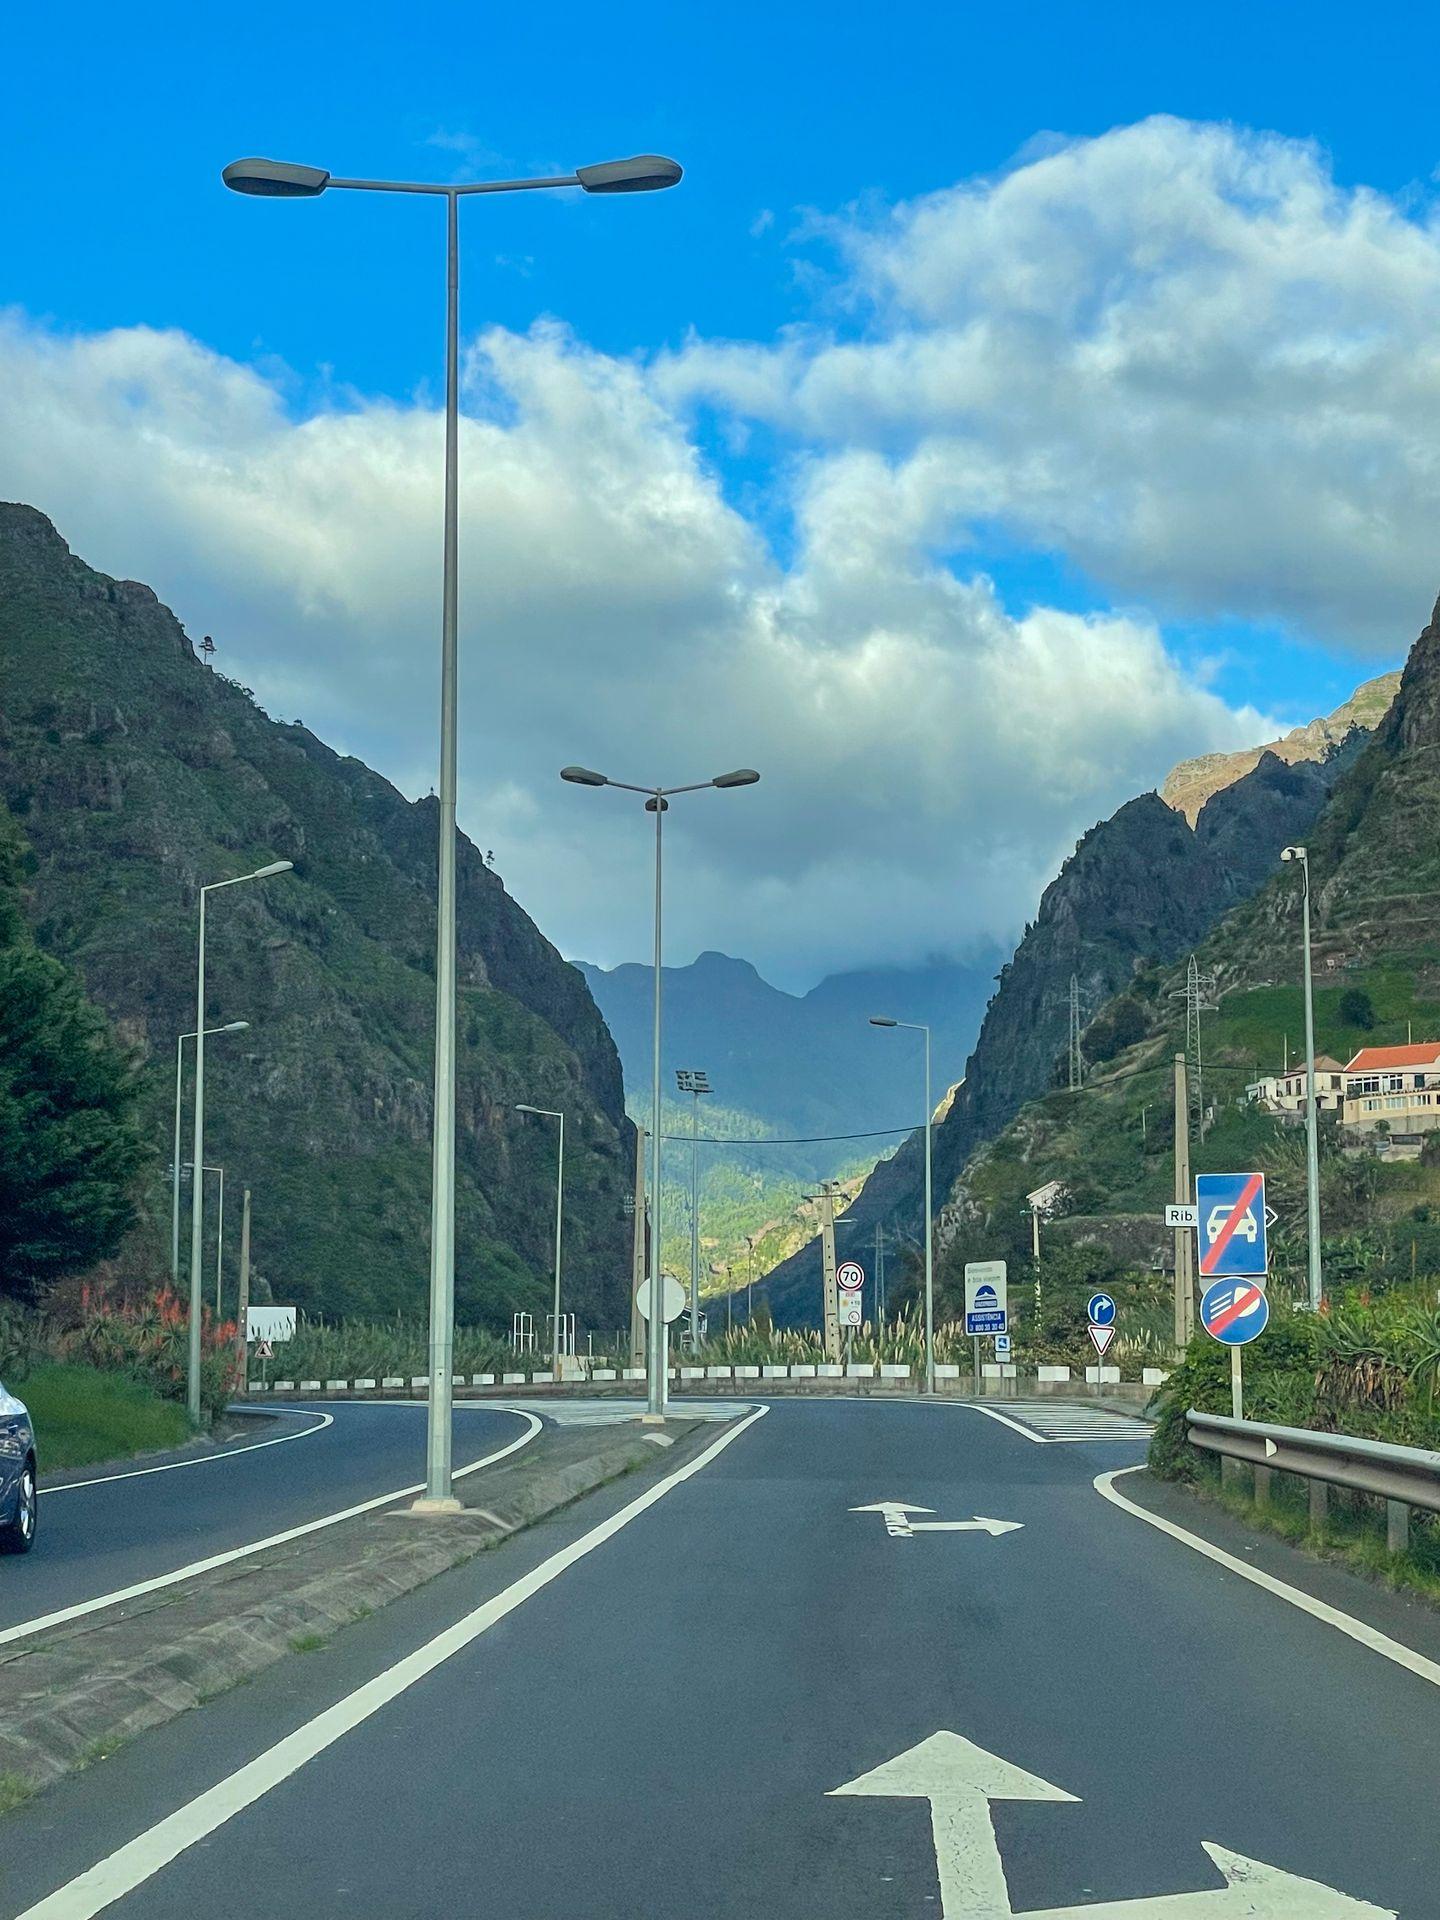 A view of driving in Madeira. The road is surrounded by tall, green mountains.